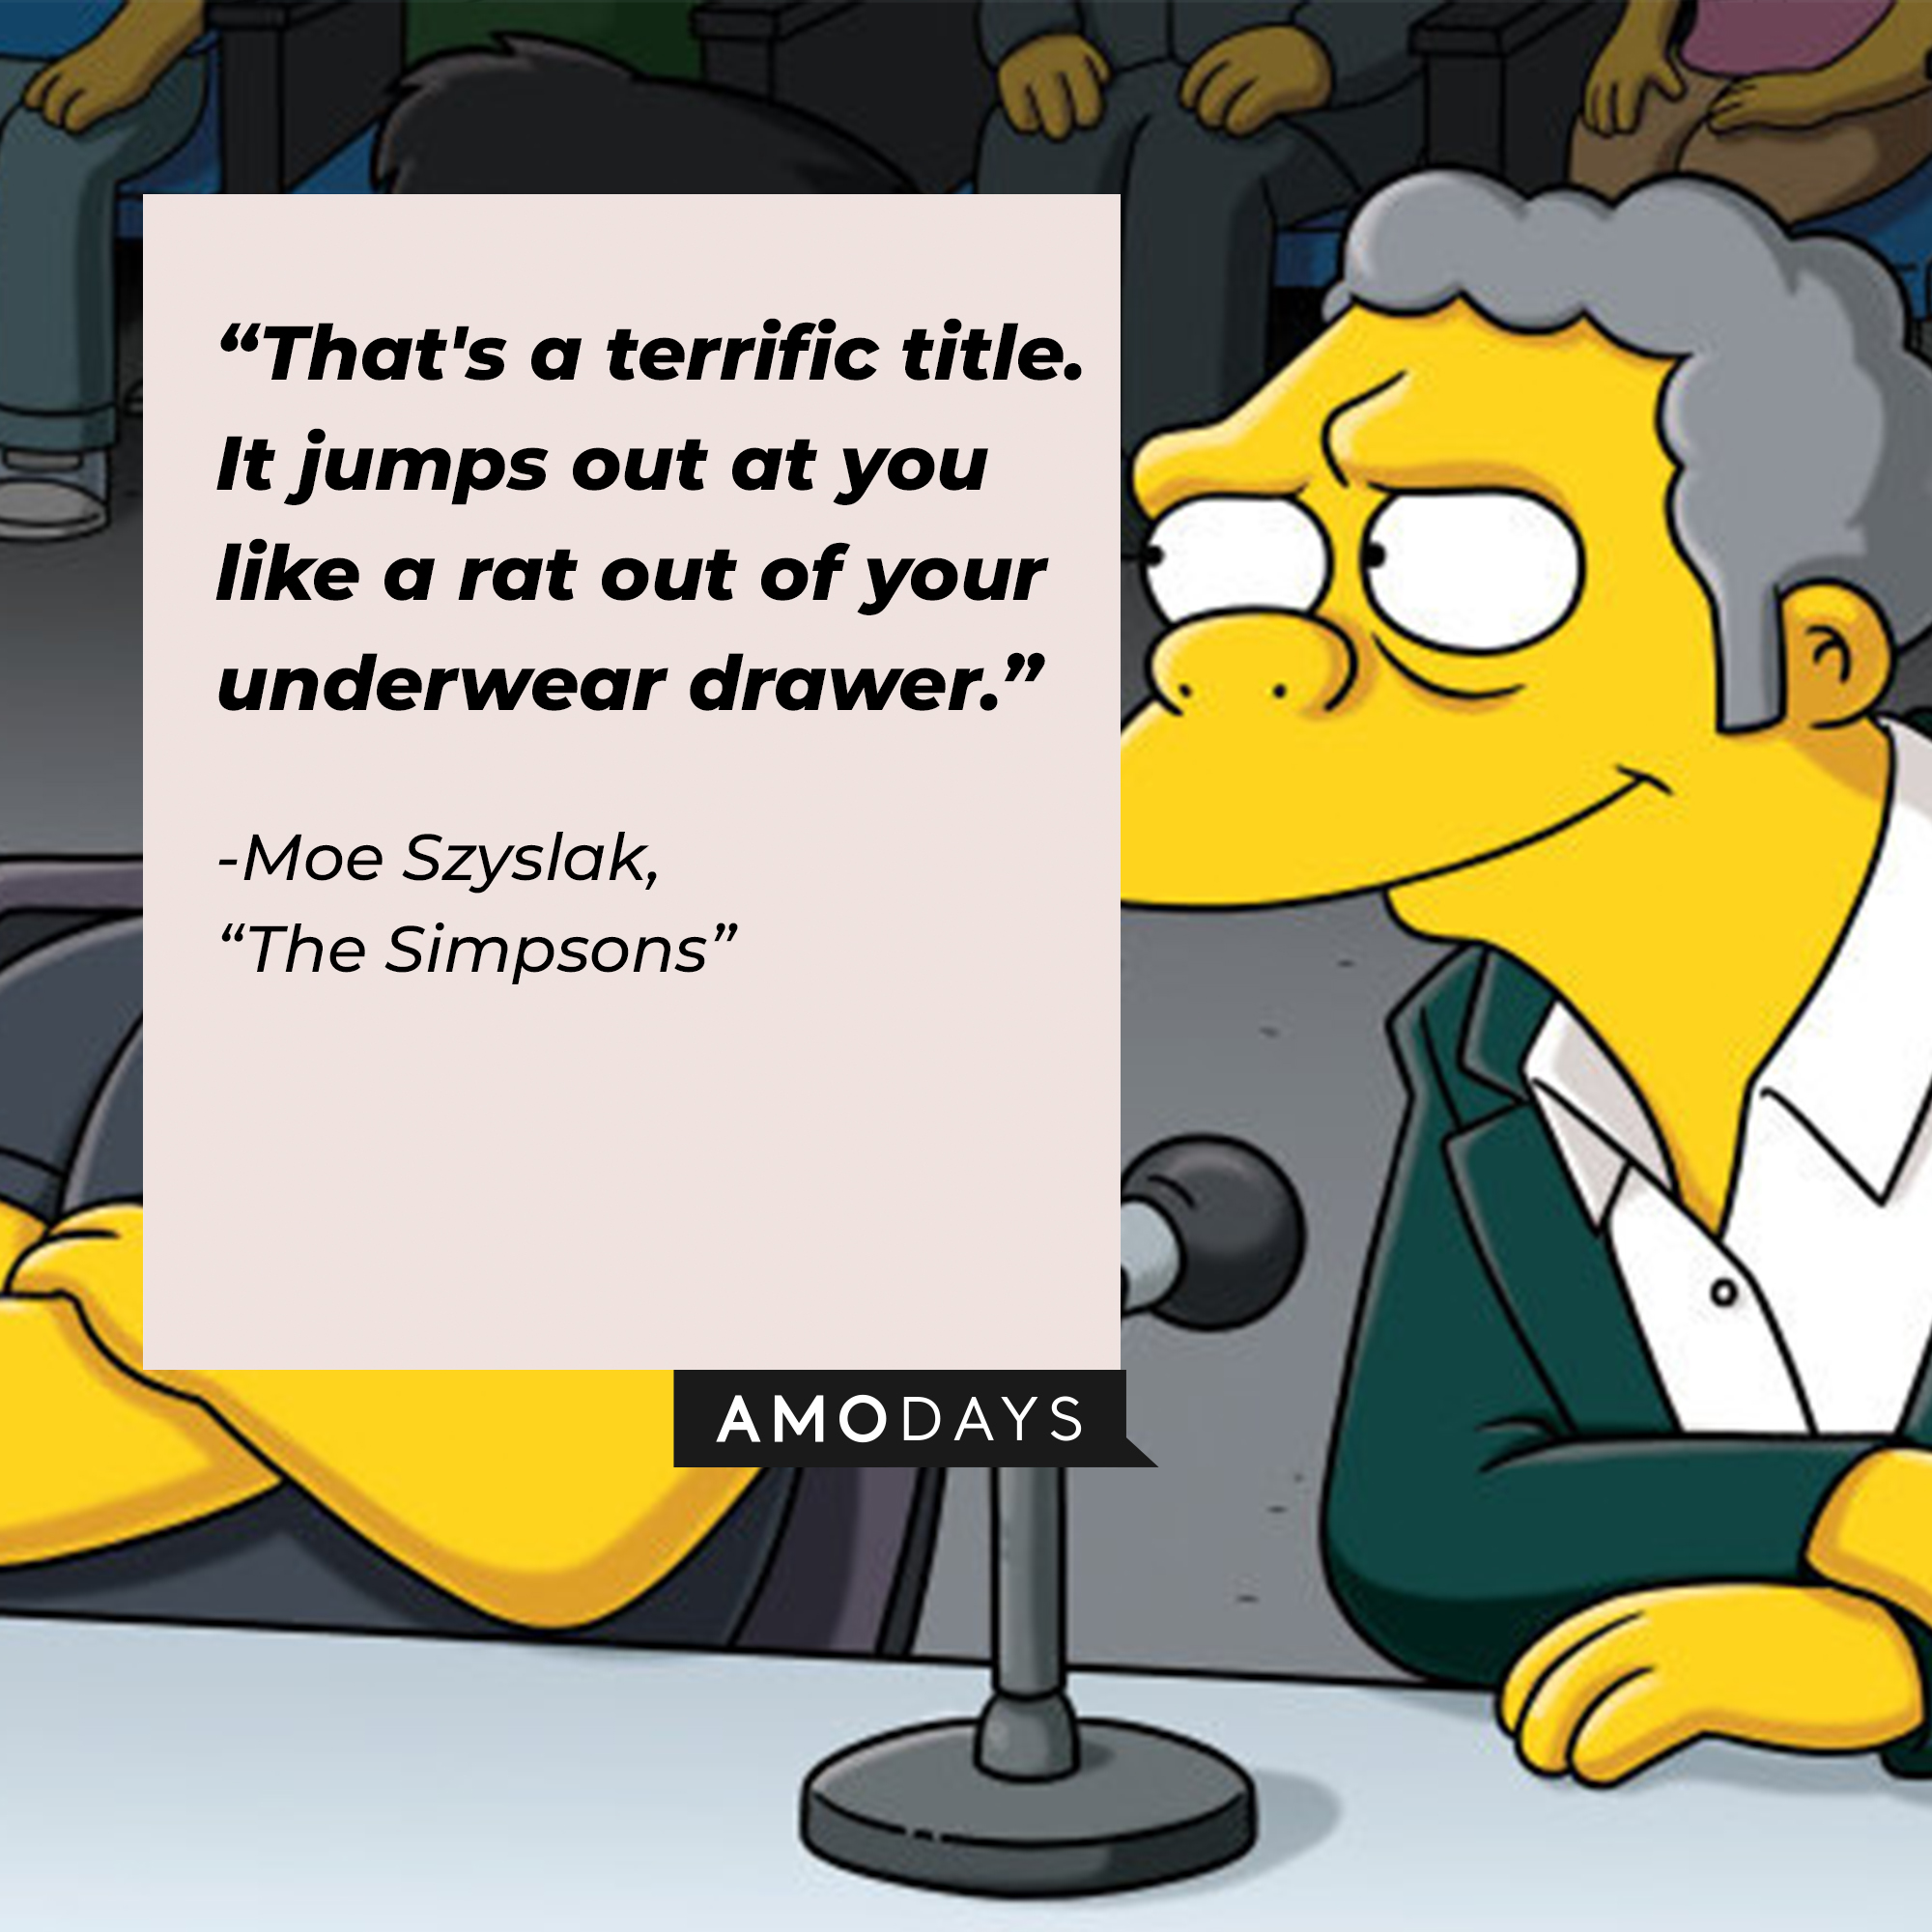 Image of Moe Szyslak with his quote from "The Simpsons:" “That's a terrific title. It jumps out at you like a rat out of your underwear drawer." | Source: Facebook.com/TheSimpsons